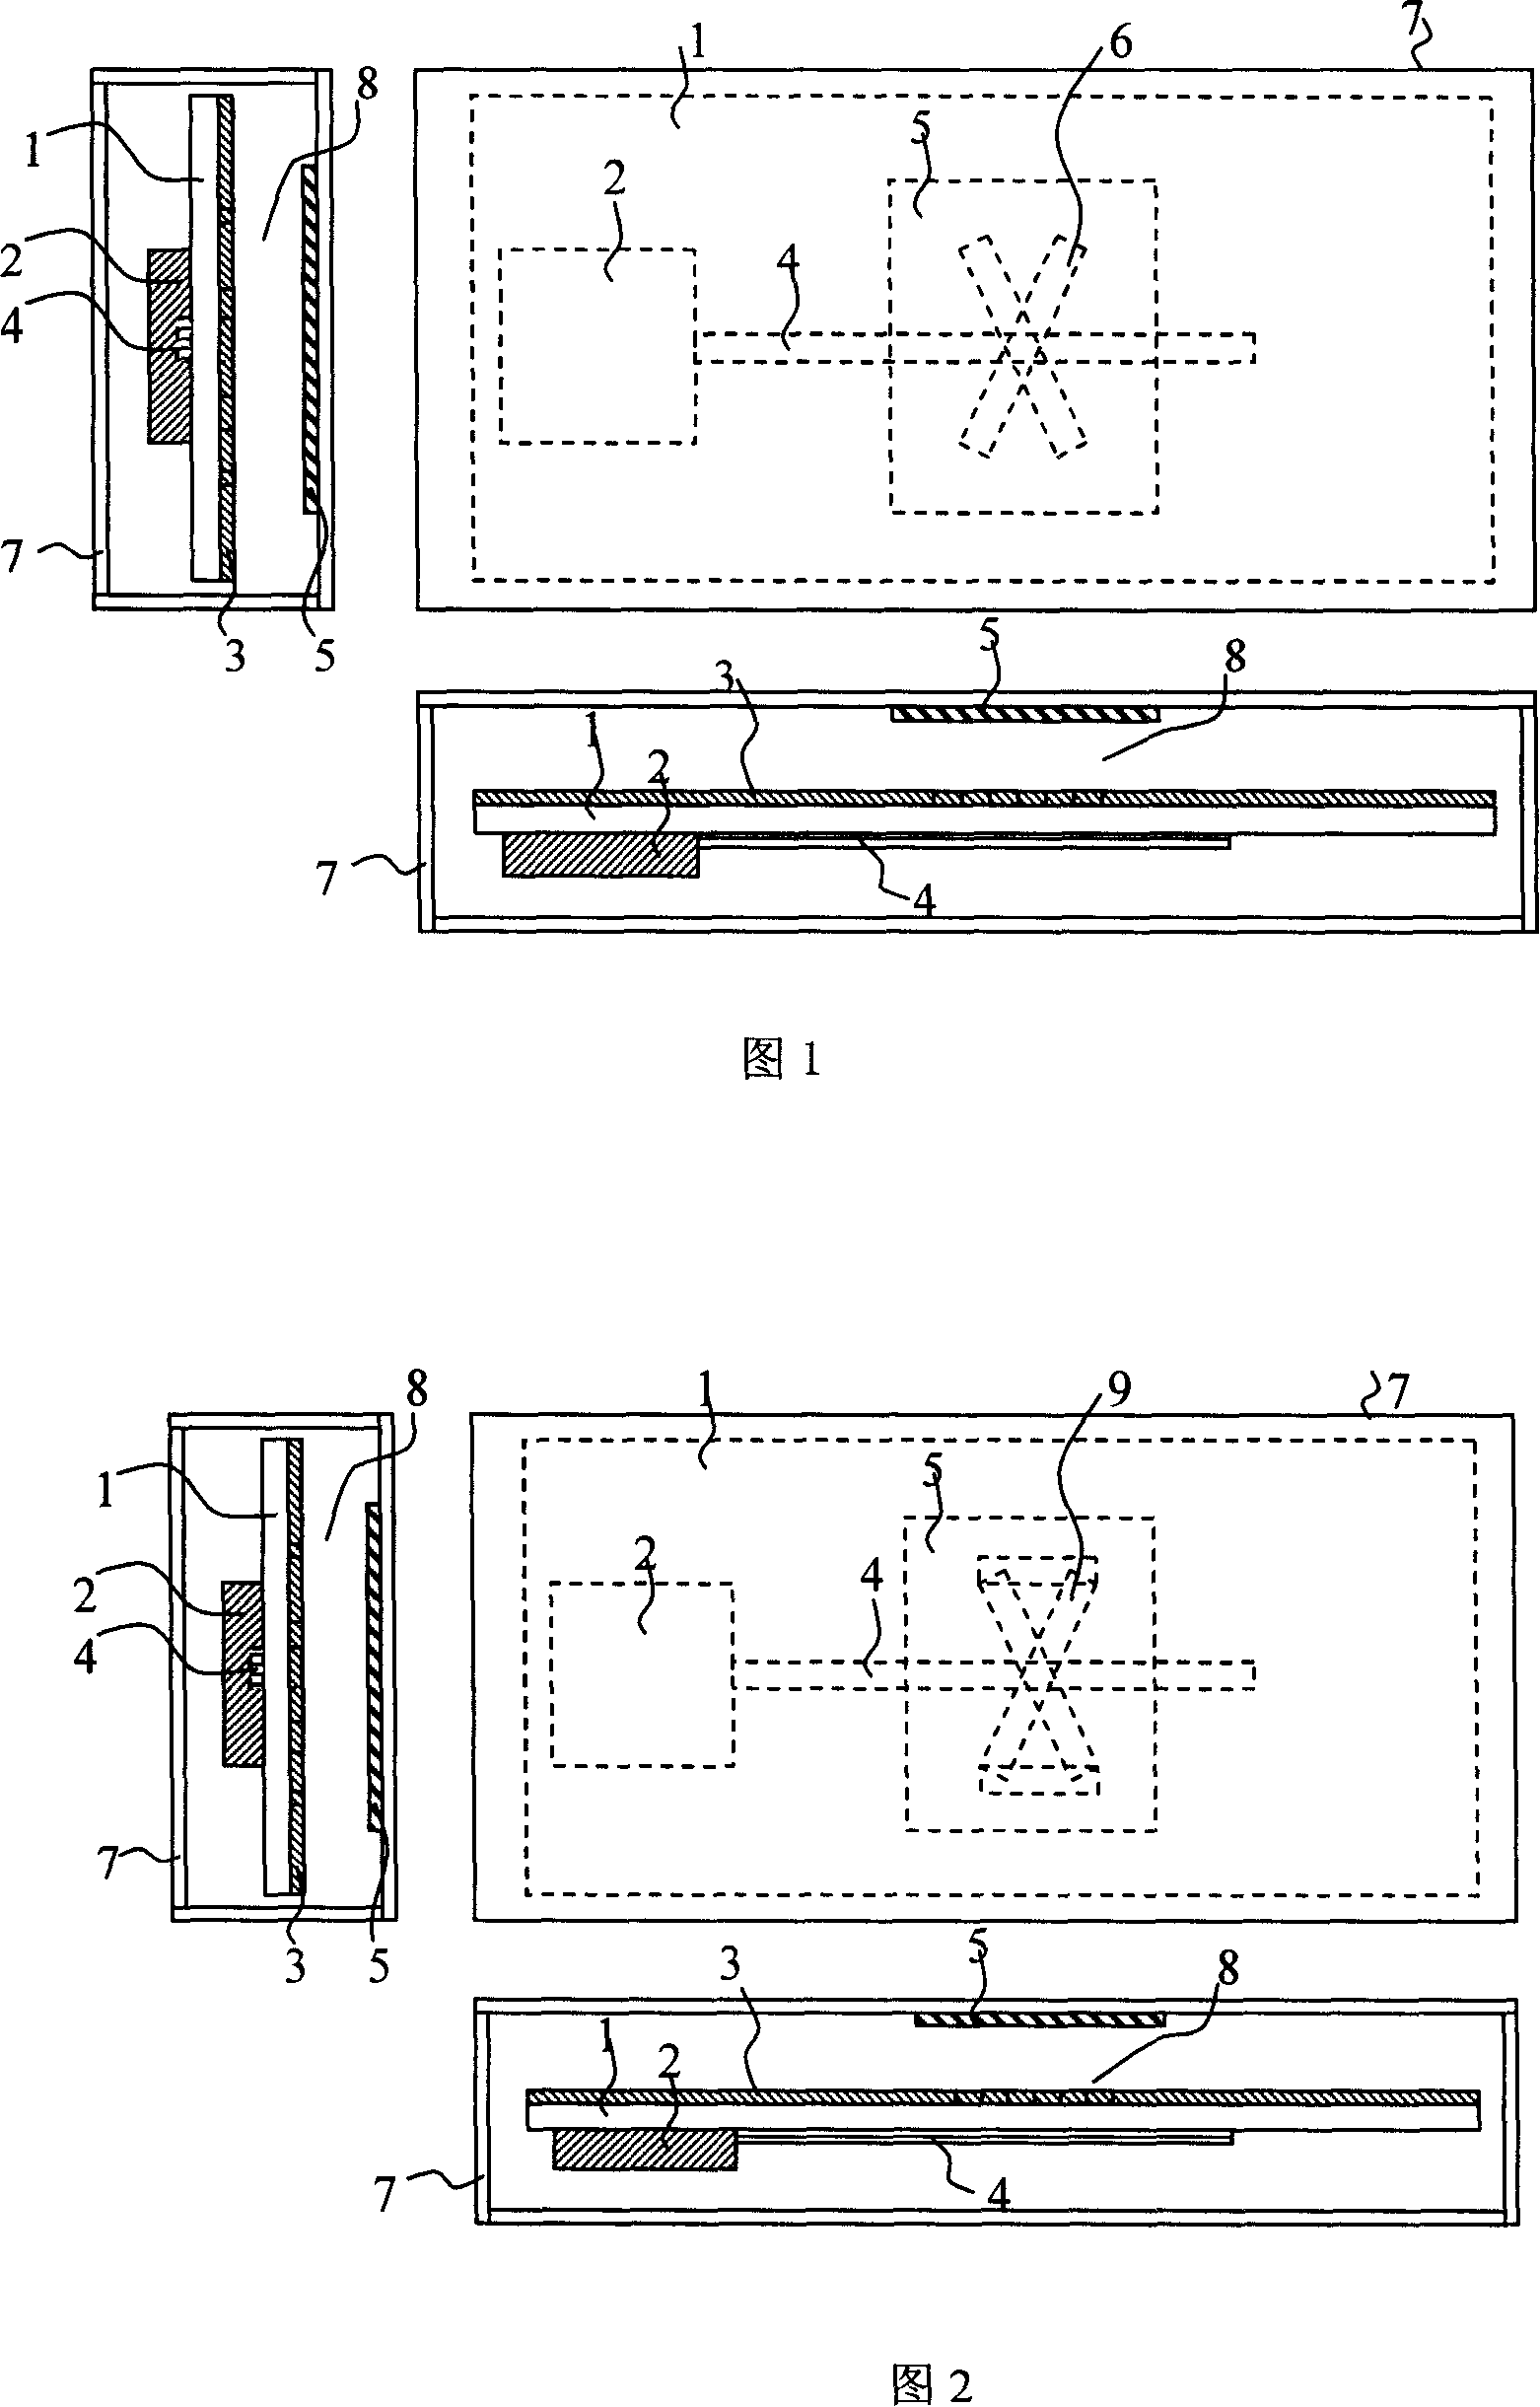 Hand-hold communication equipment with coupling slot antenna module